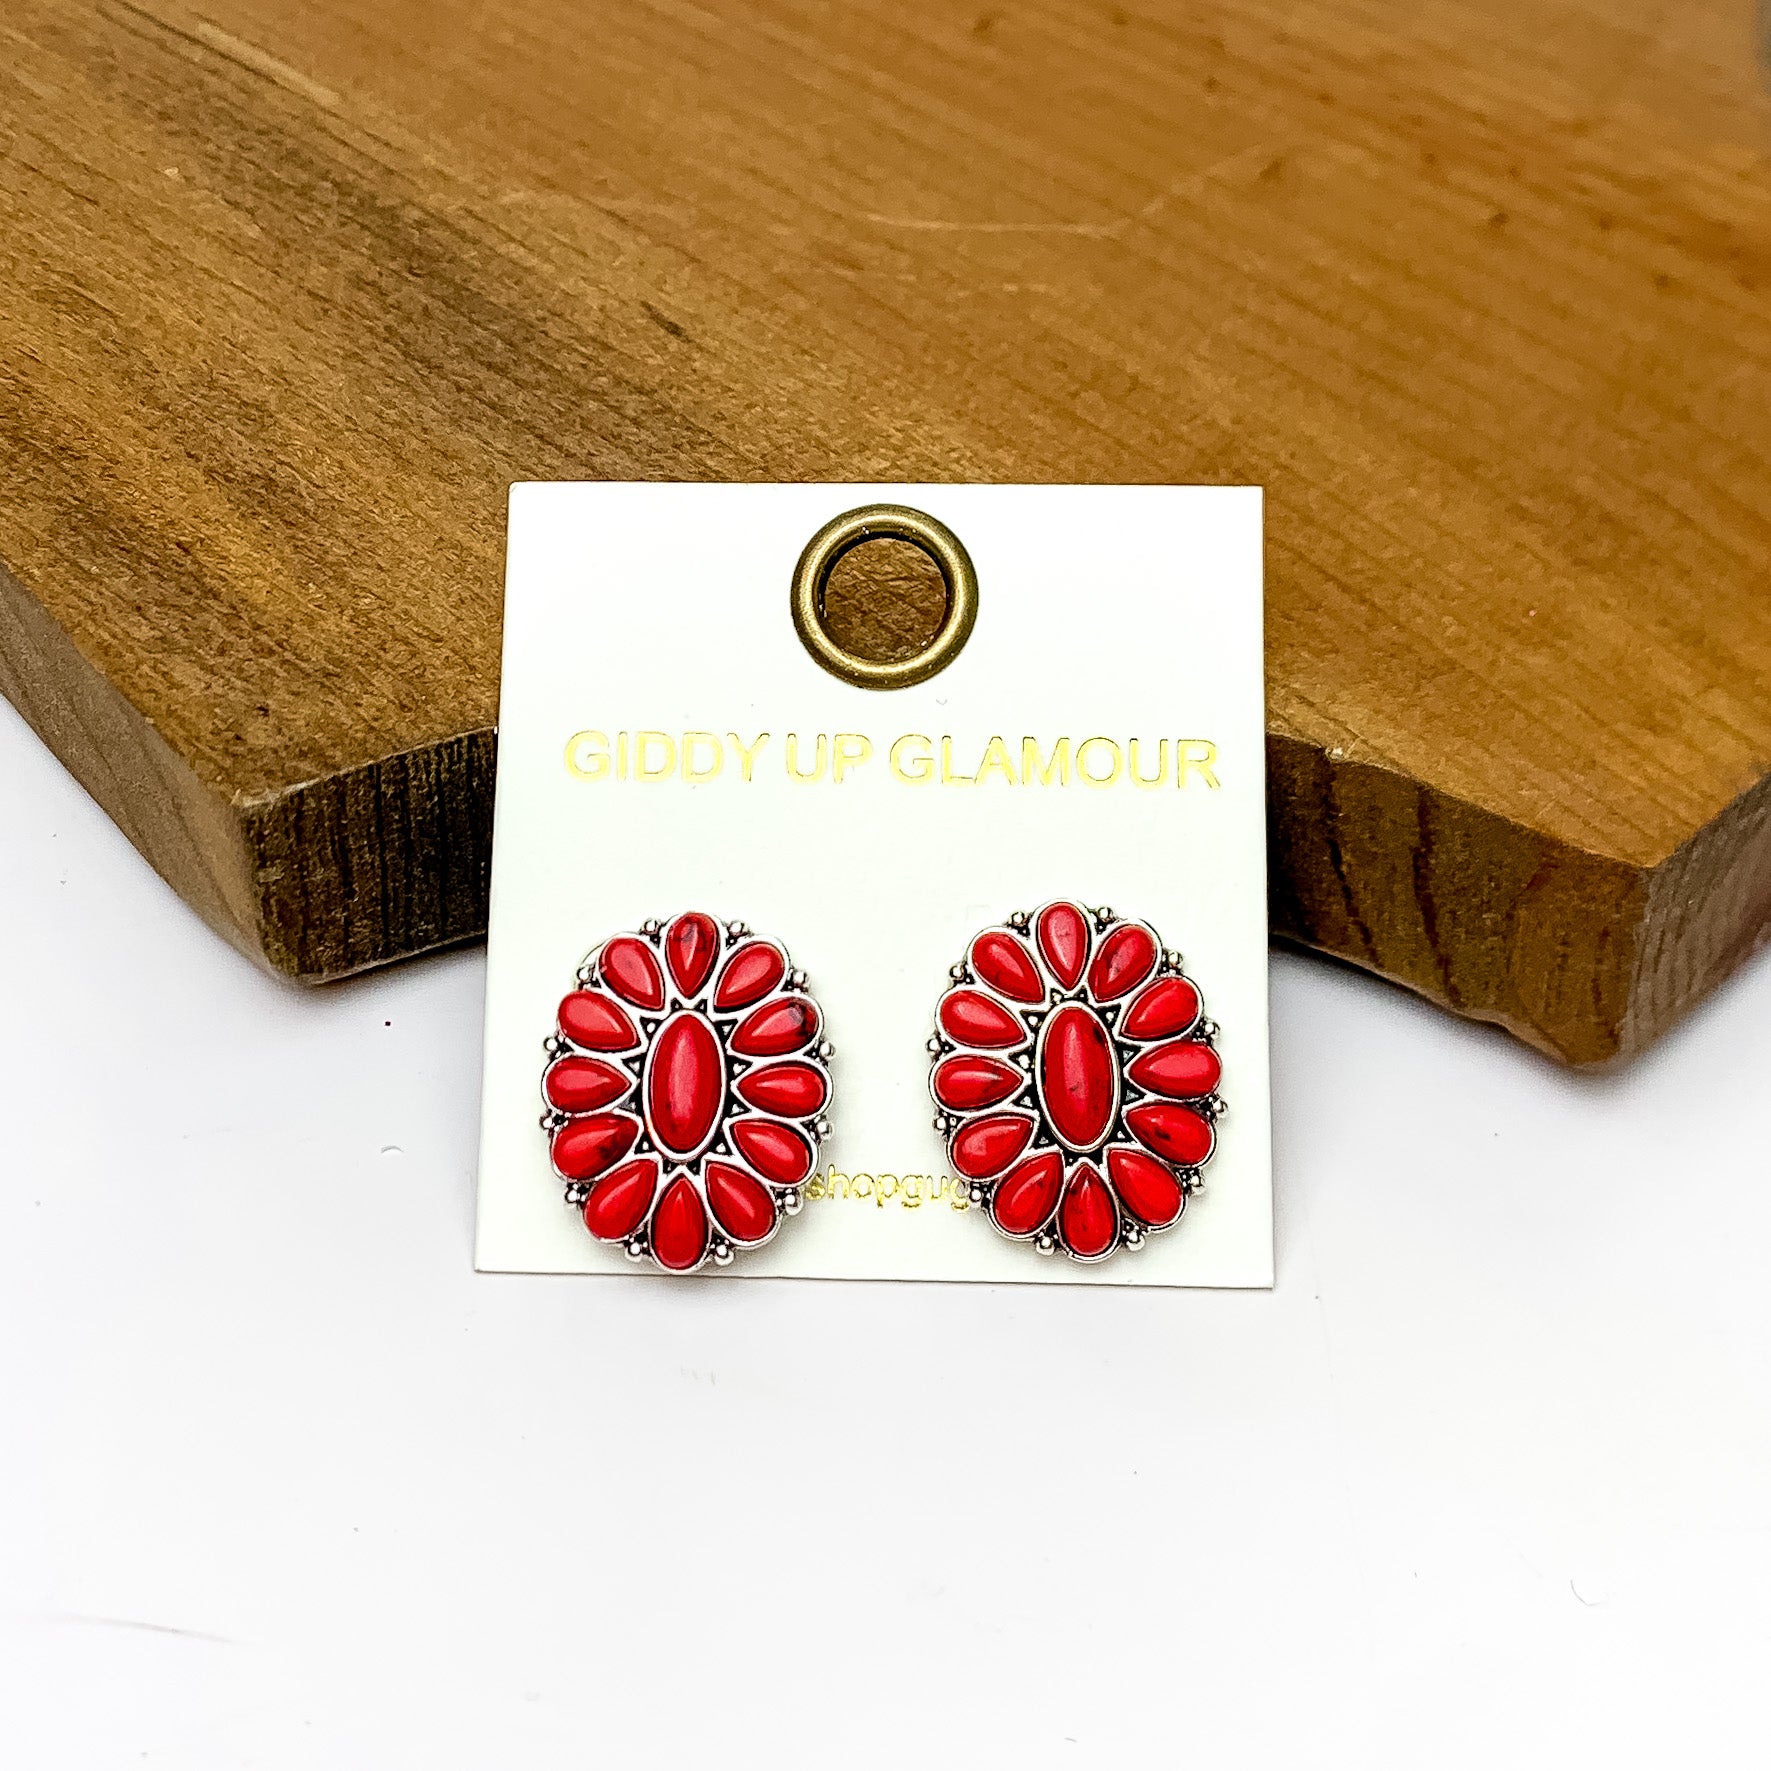 Silver Tone Concho Cluster Oval Earrings in Red. Pictured on a white background with the earrings laying against a wood piece.